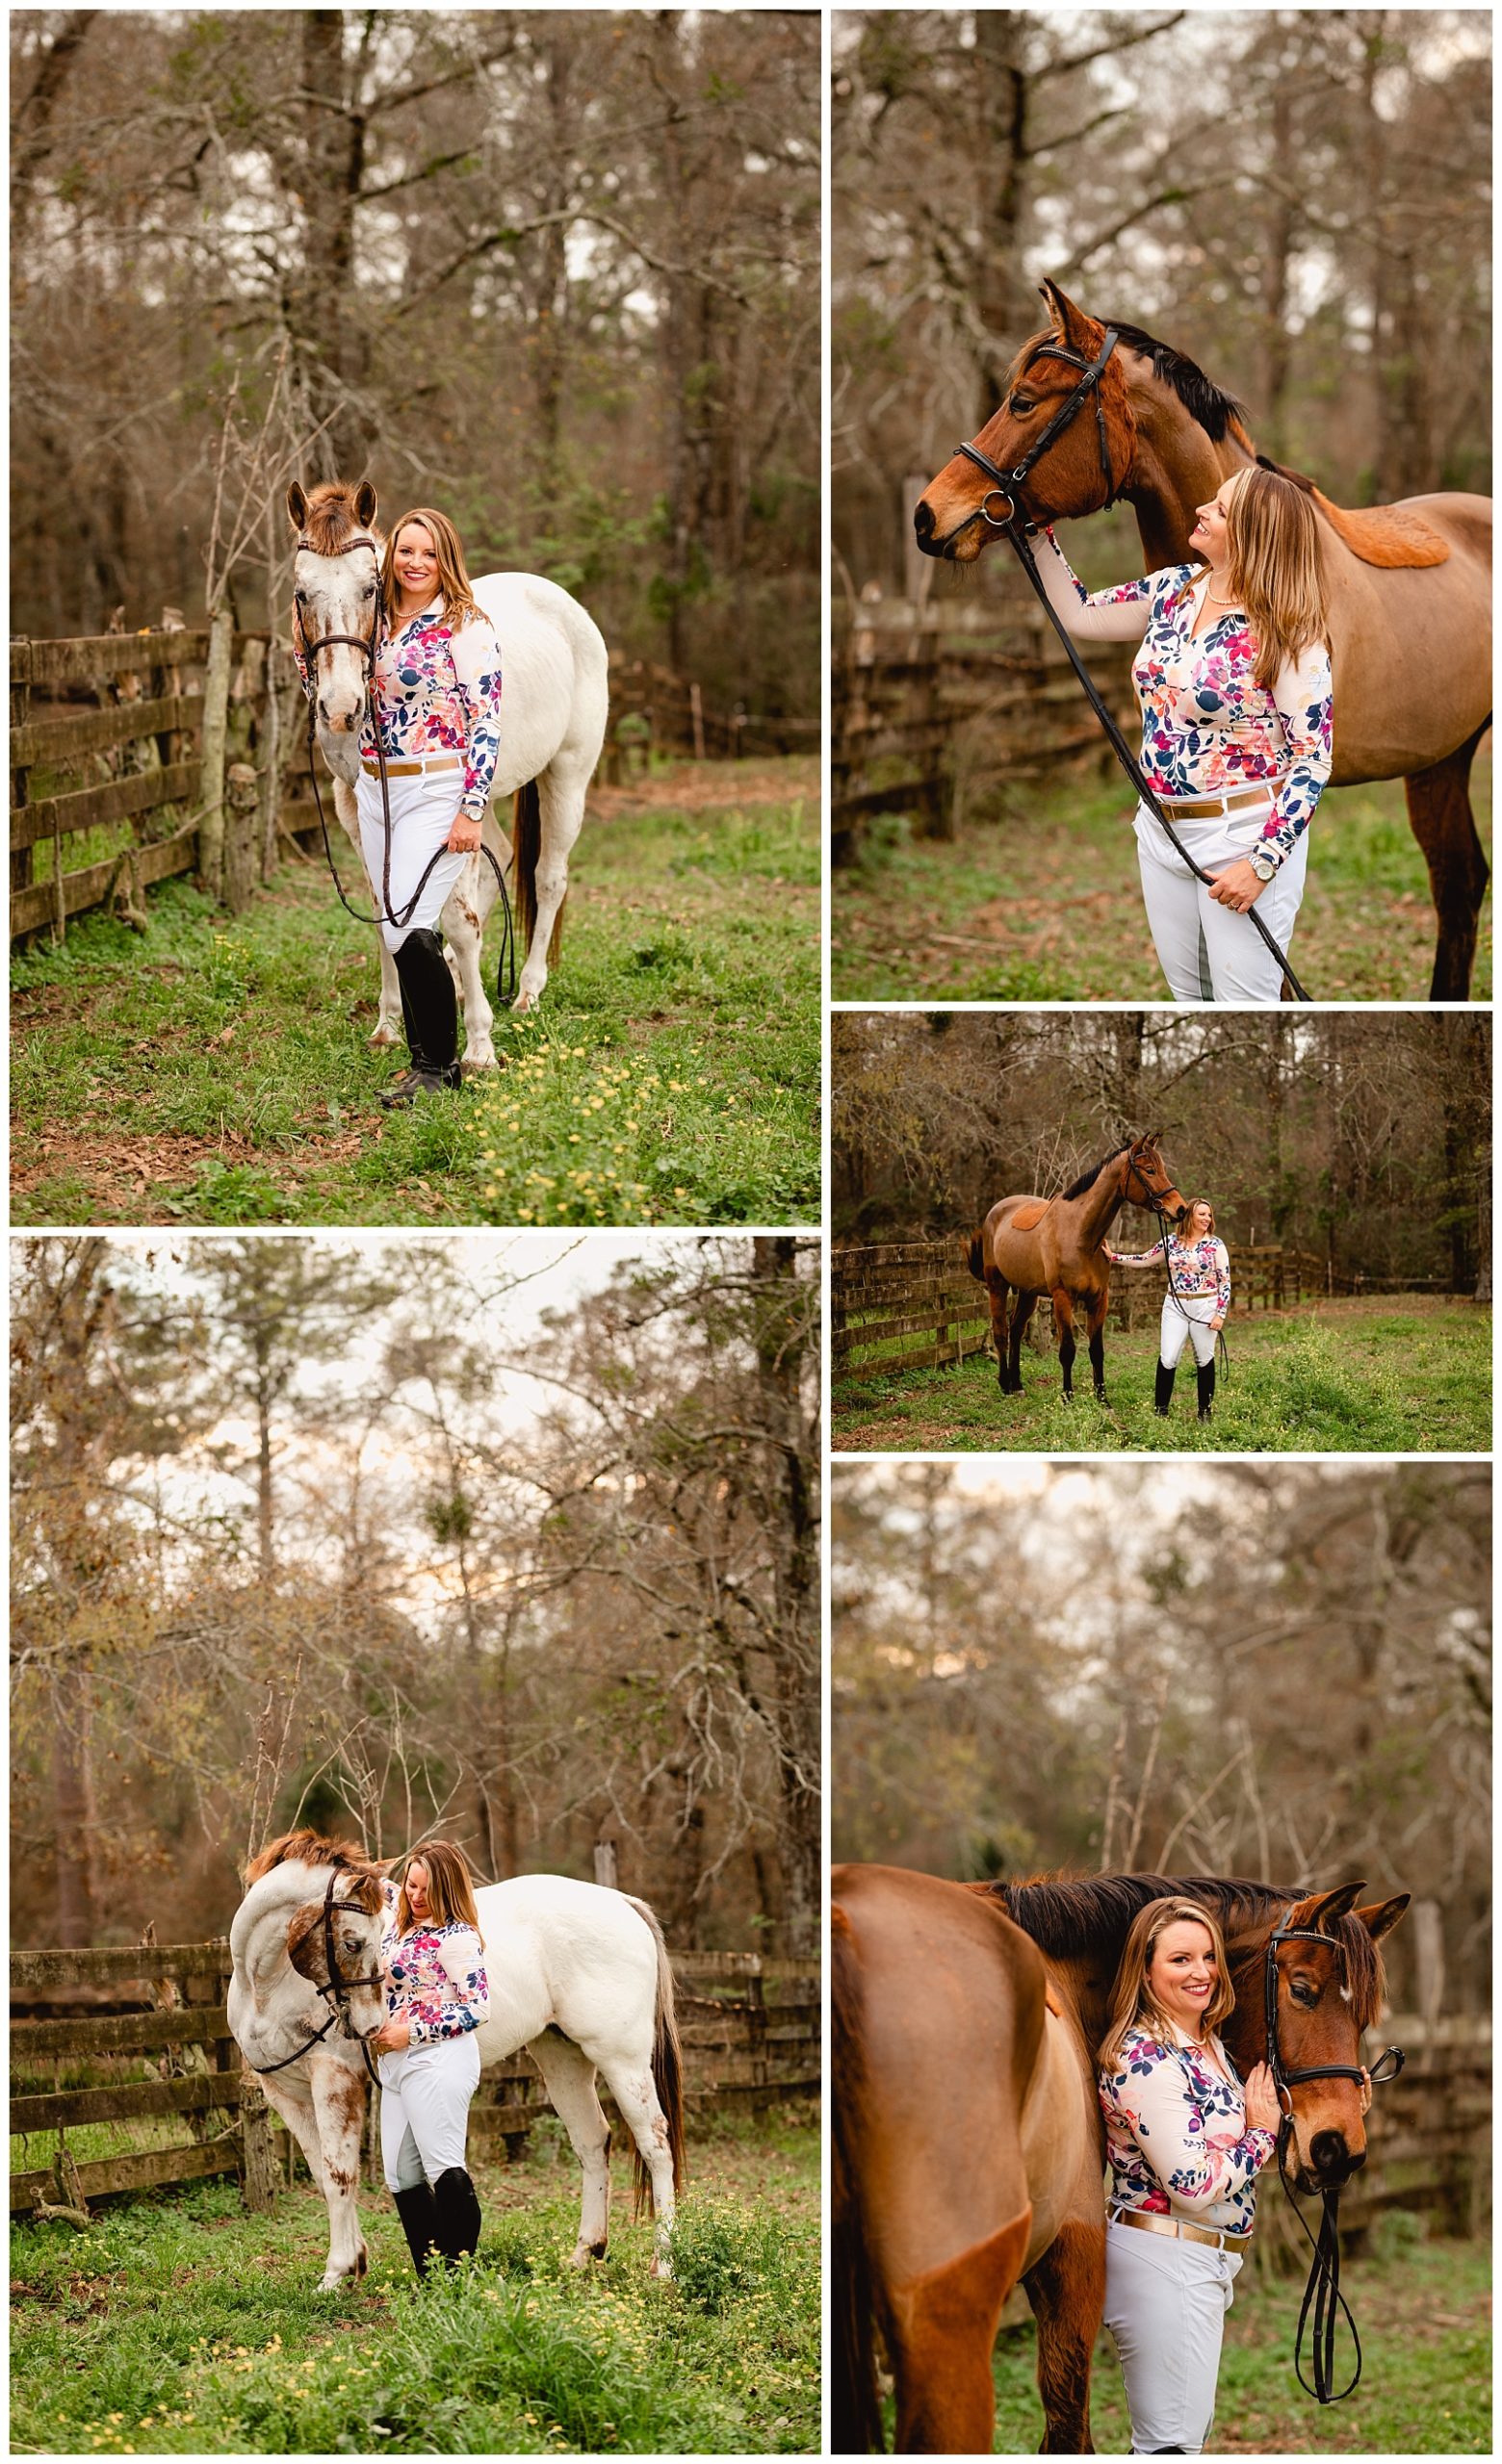 Cloudy day for photos in Tallahassee, Florida at Iron Star Equestrian.